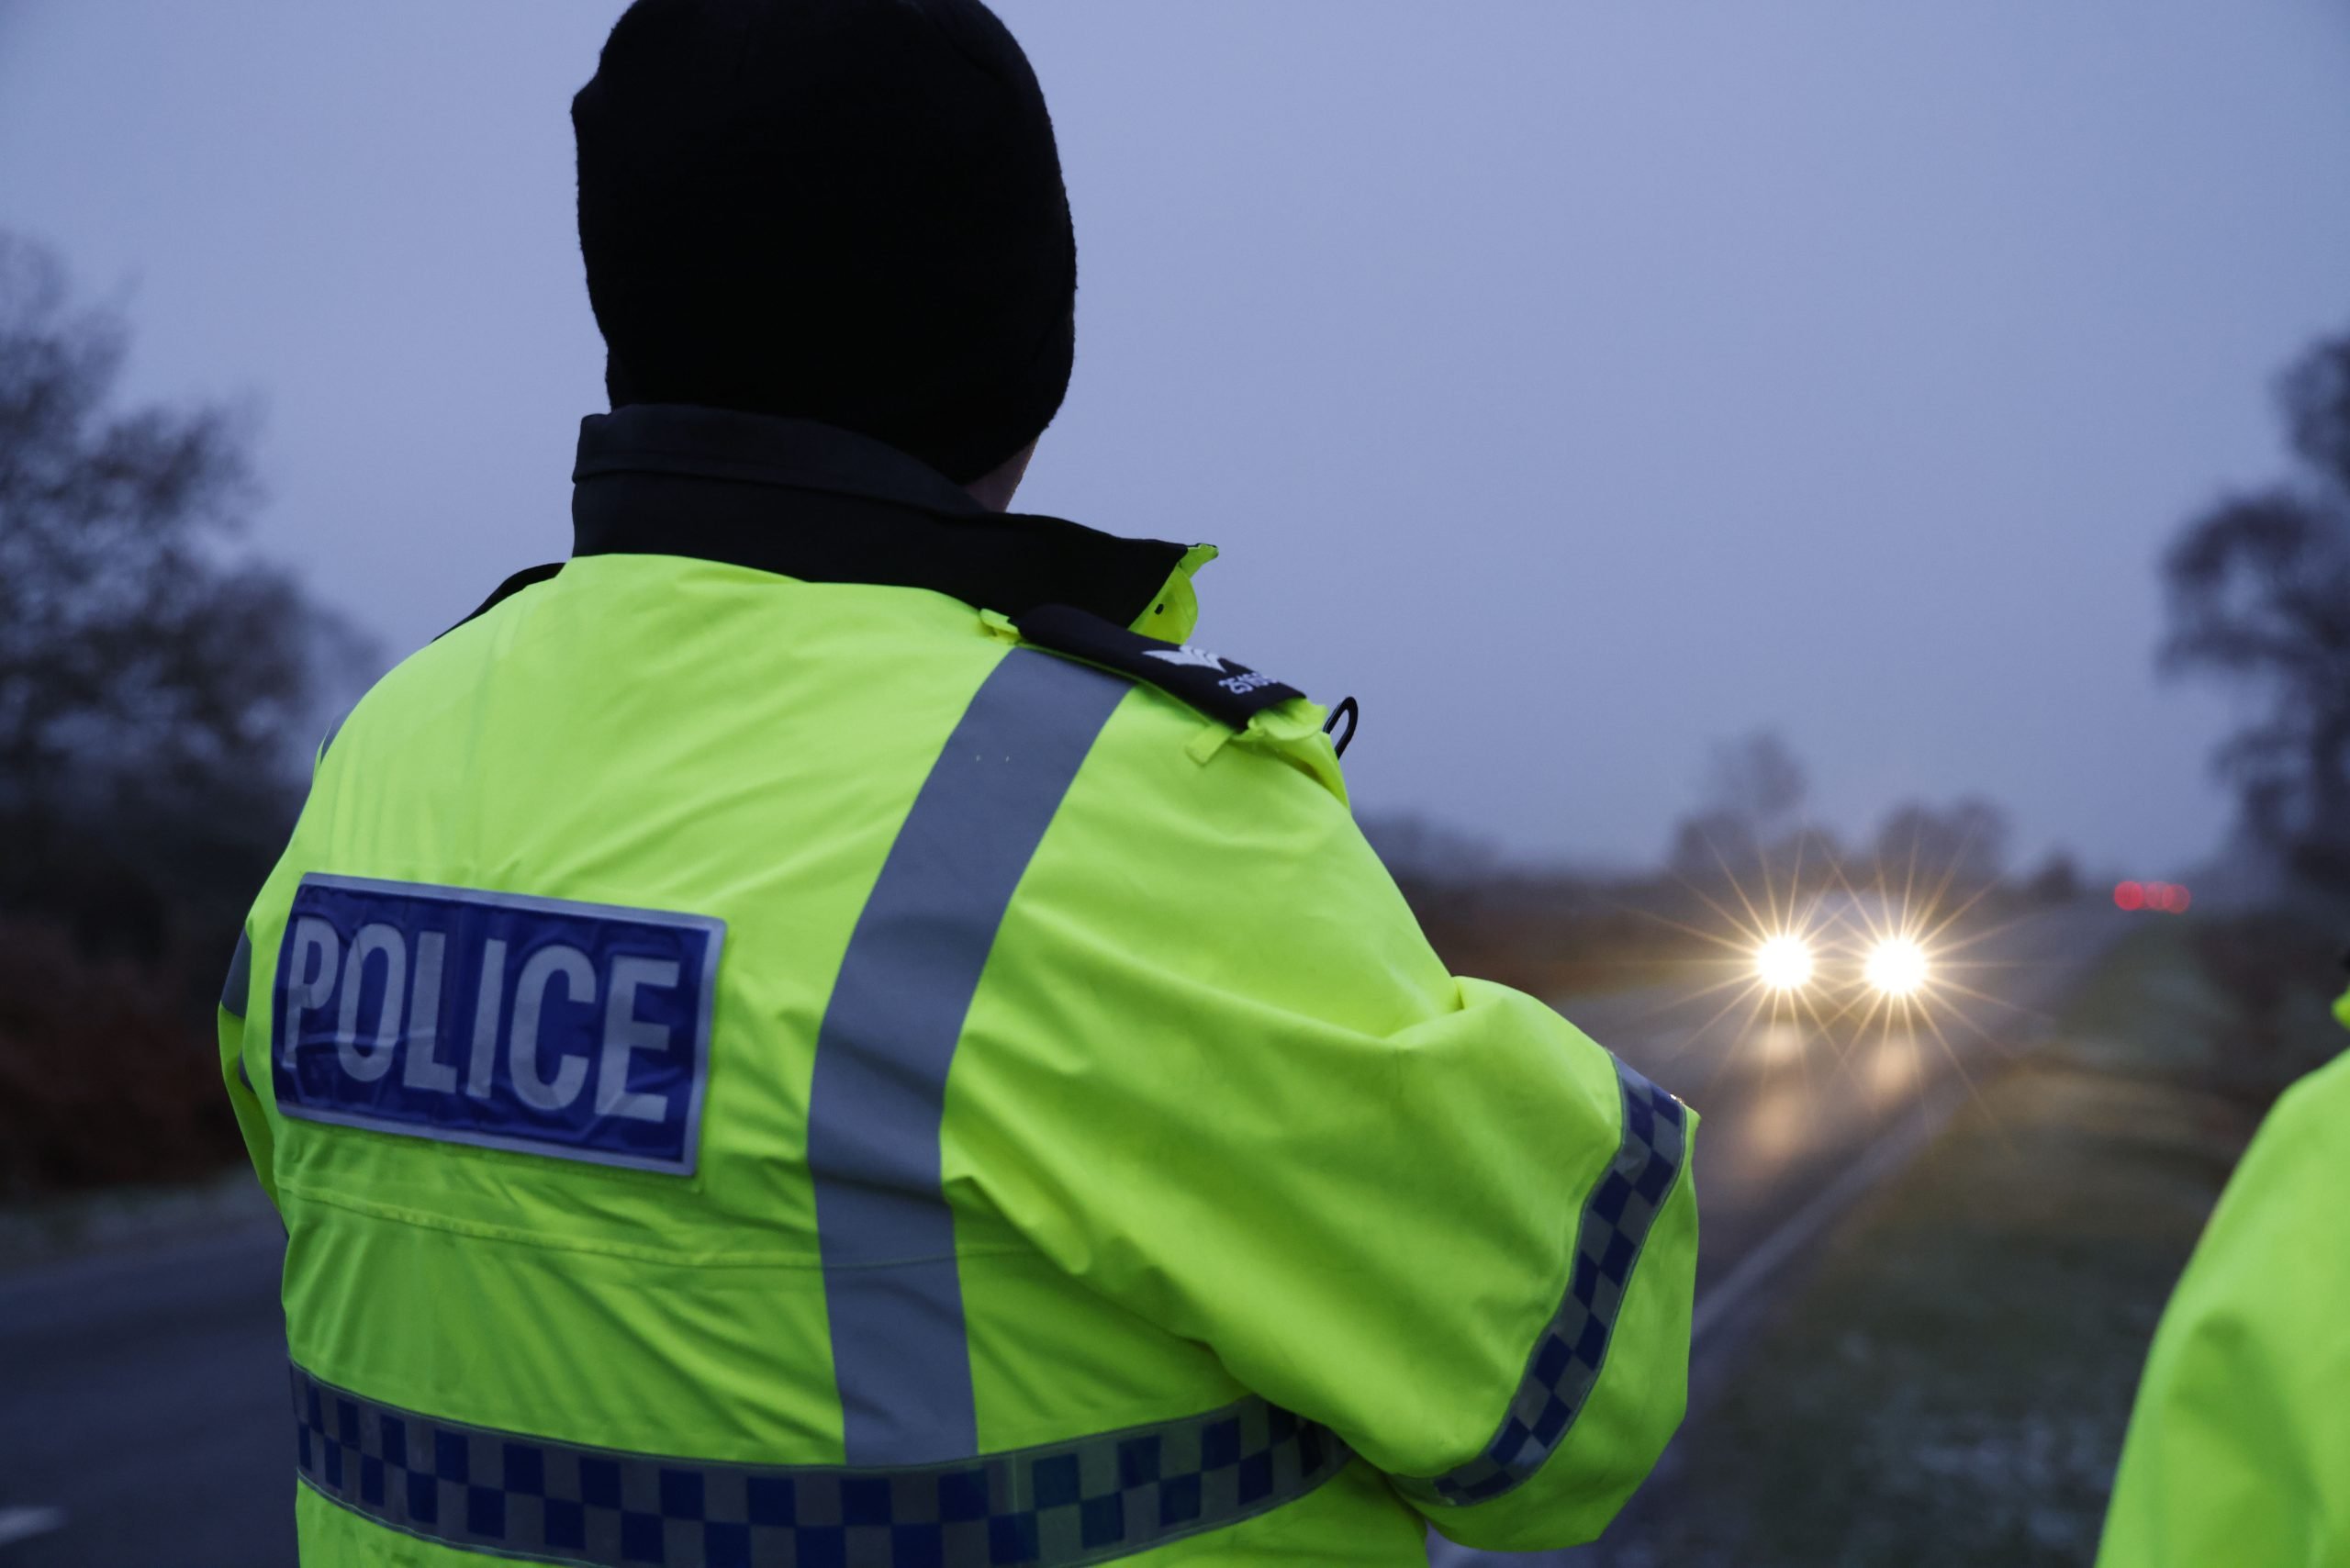 A policeman in bright fluorescent jacket with POLICE on the back. Stood on a roadside with arms folded and facing away from the camera. A car is oncoming and can be seen over his shoulder. It is early morning and the car has it's headlights on.